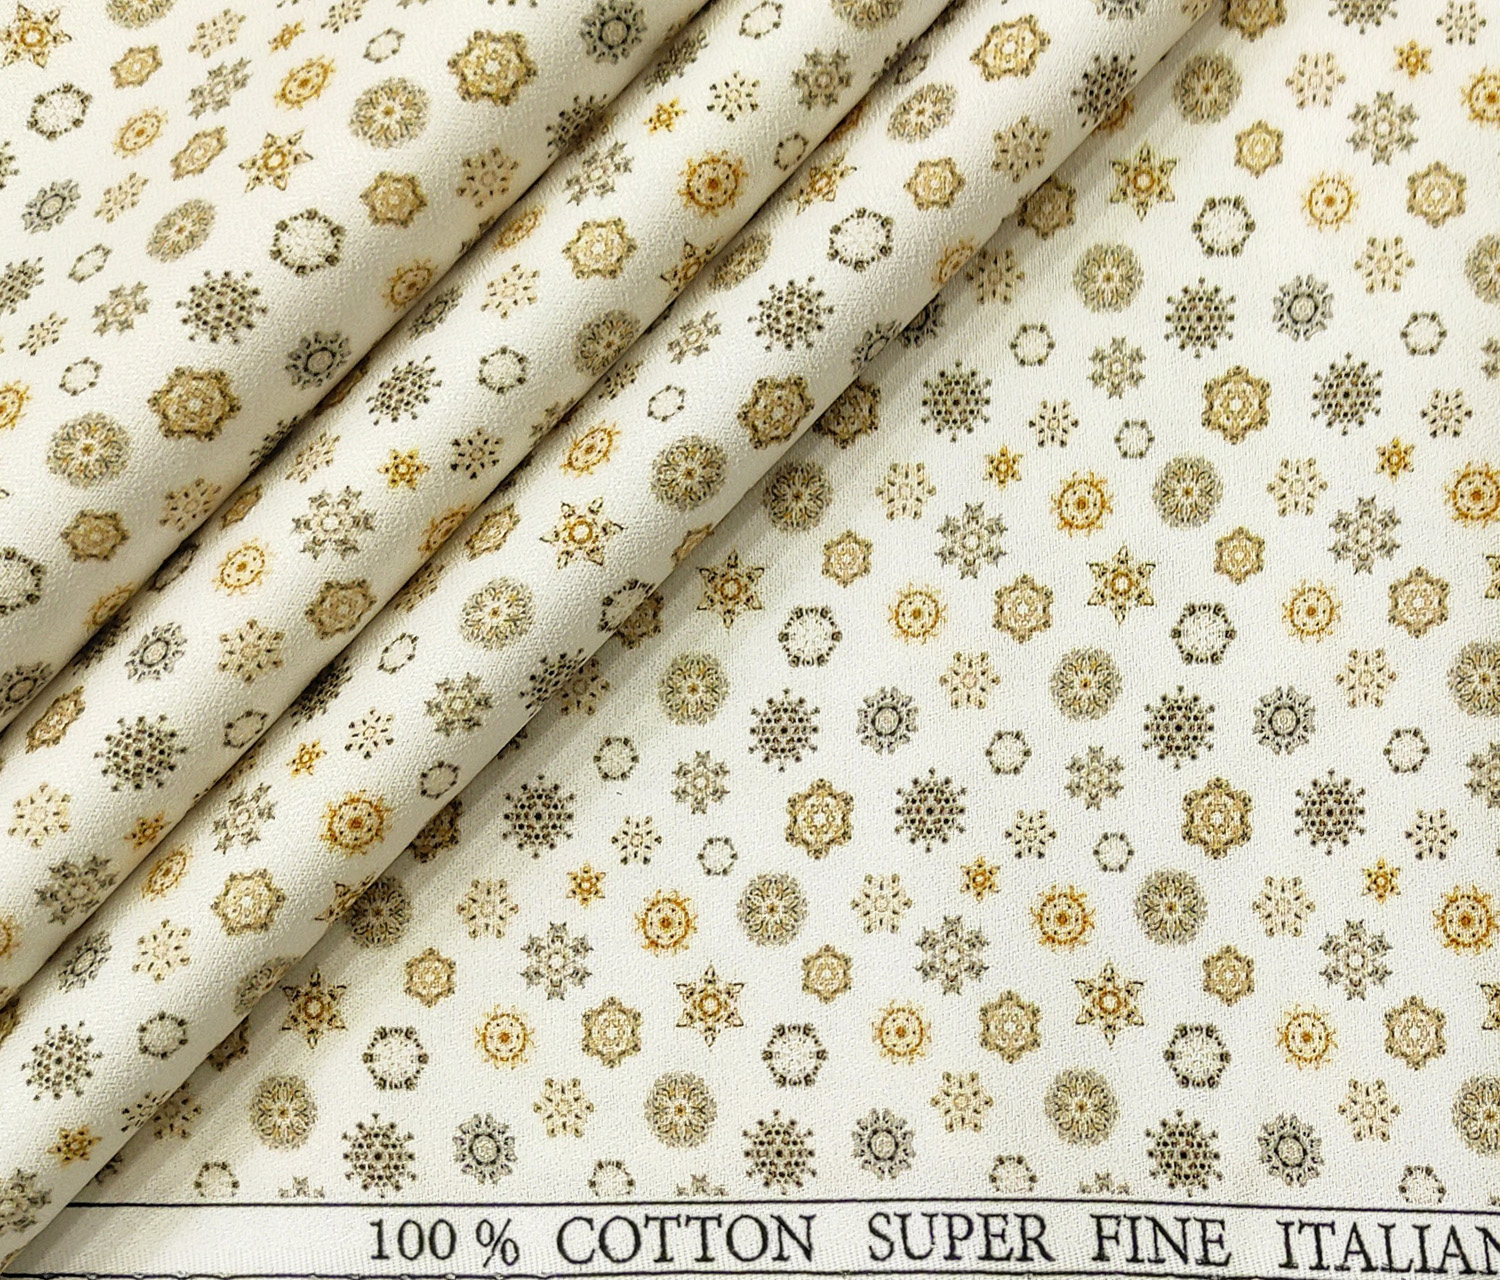 PEE GEE Men's Cotton Printed 2.25 Meter Unstitched Shirting Fabric (Milky White)